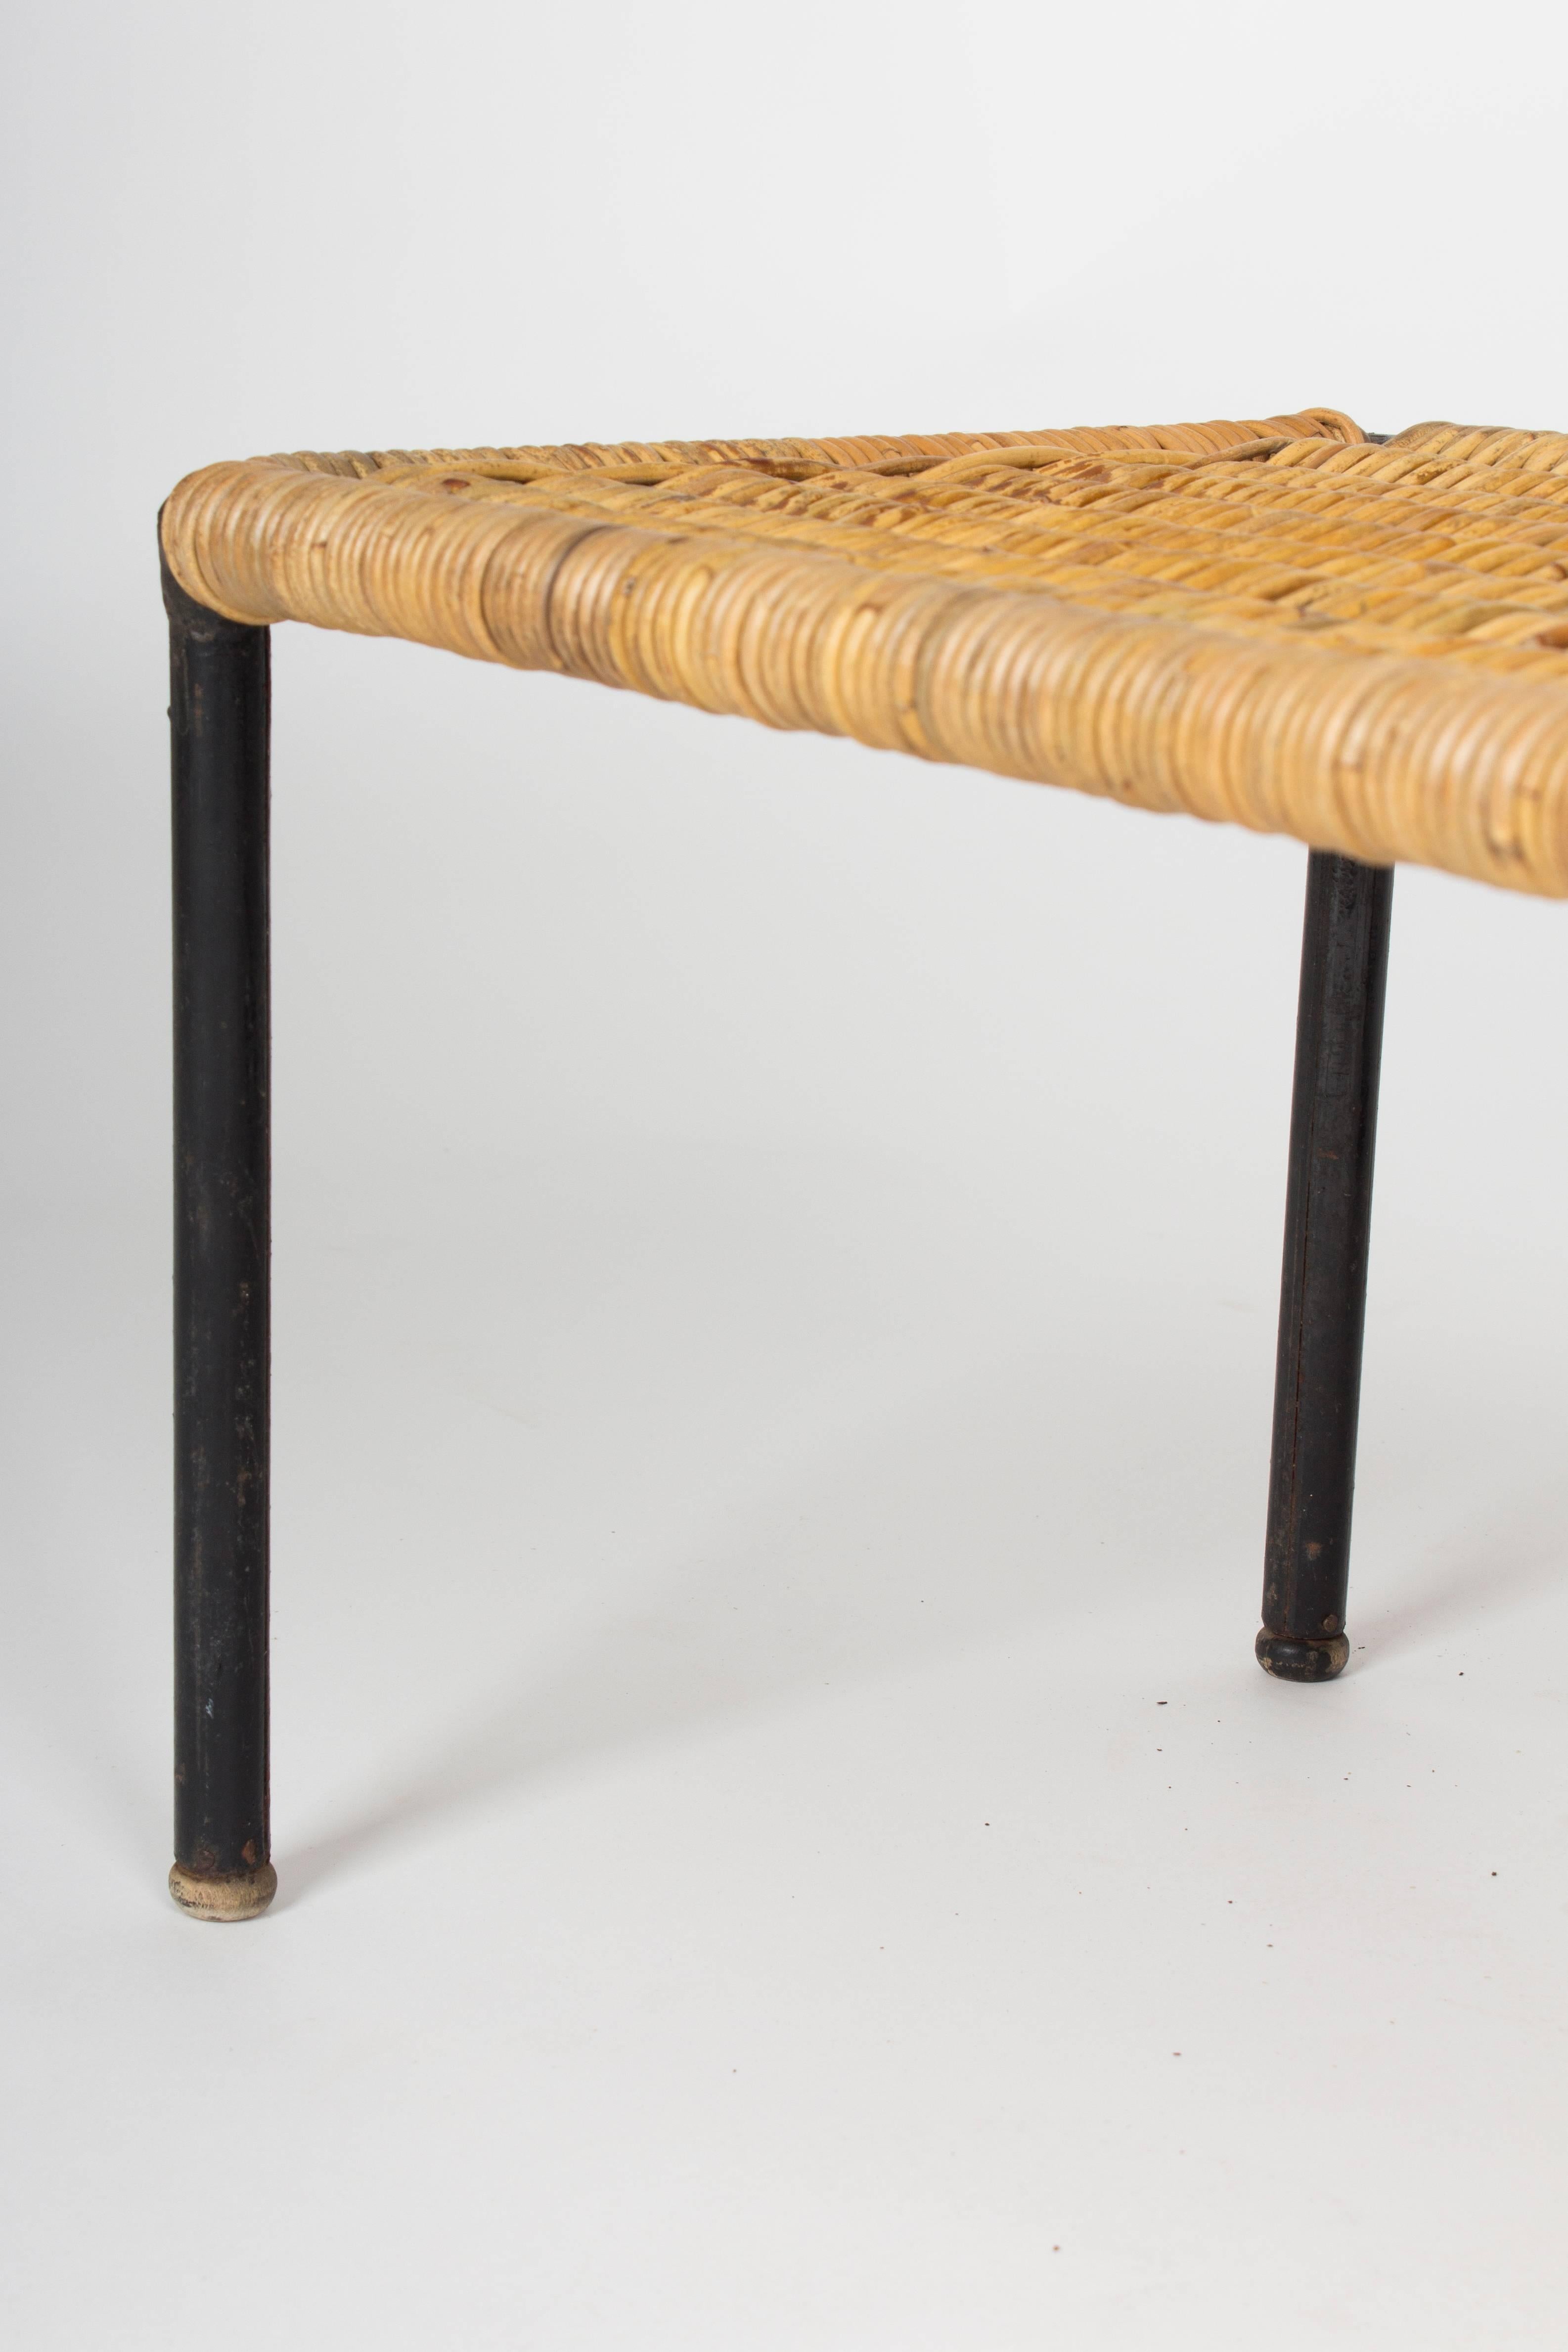 Mid-20th Century Rare Pair of Early Auböck Wicker Side Tables, Vienna, 1950s For Sale